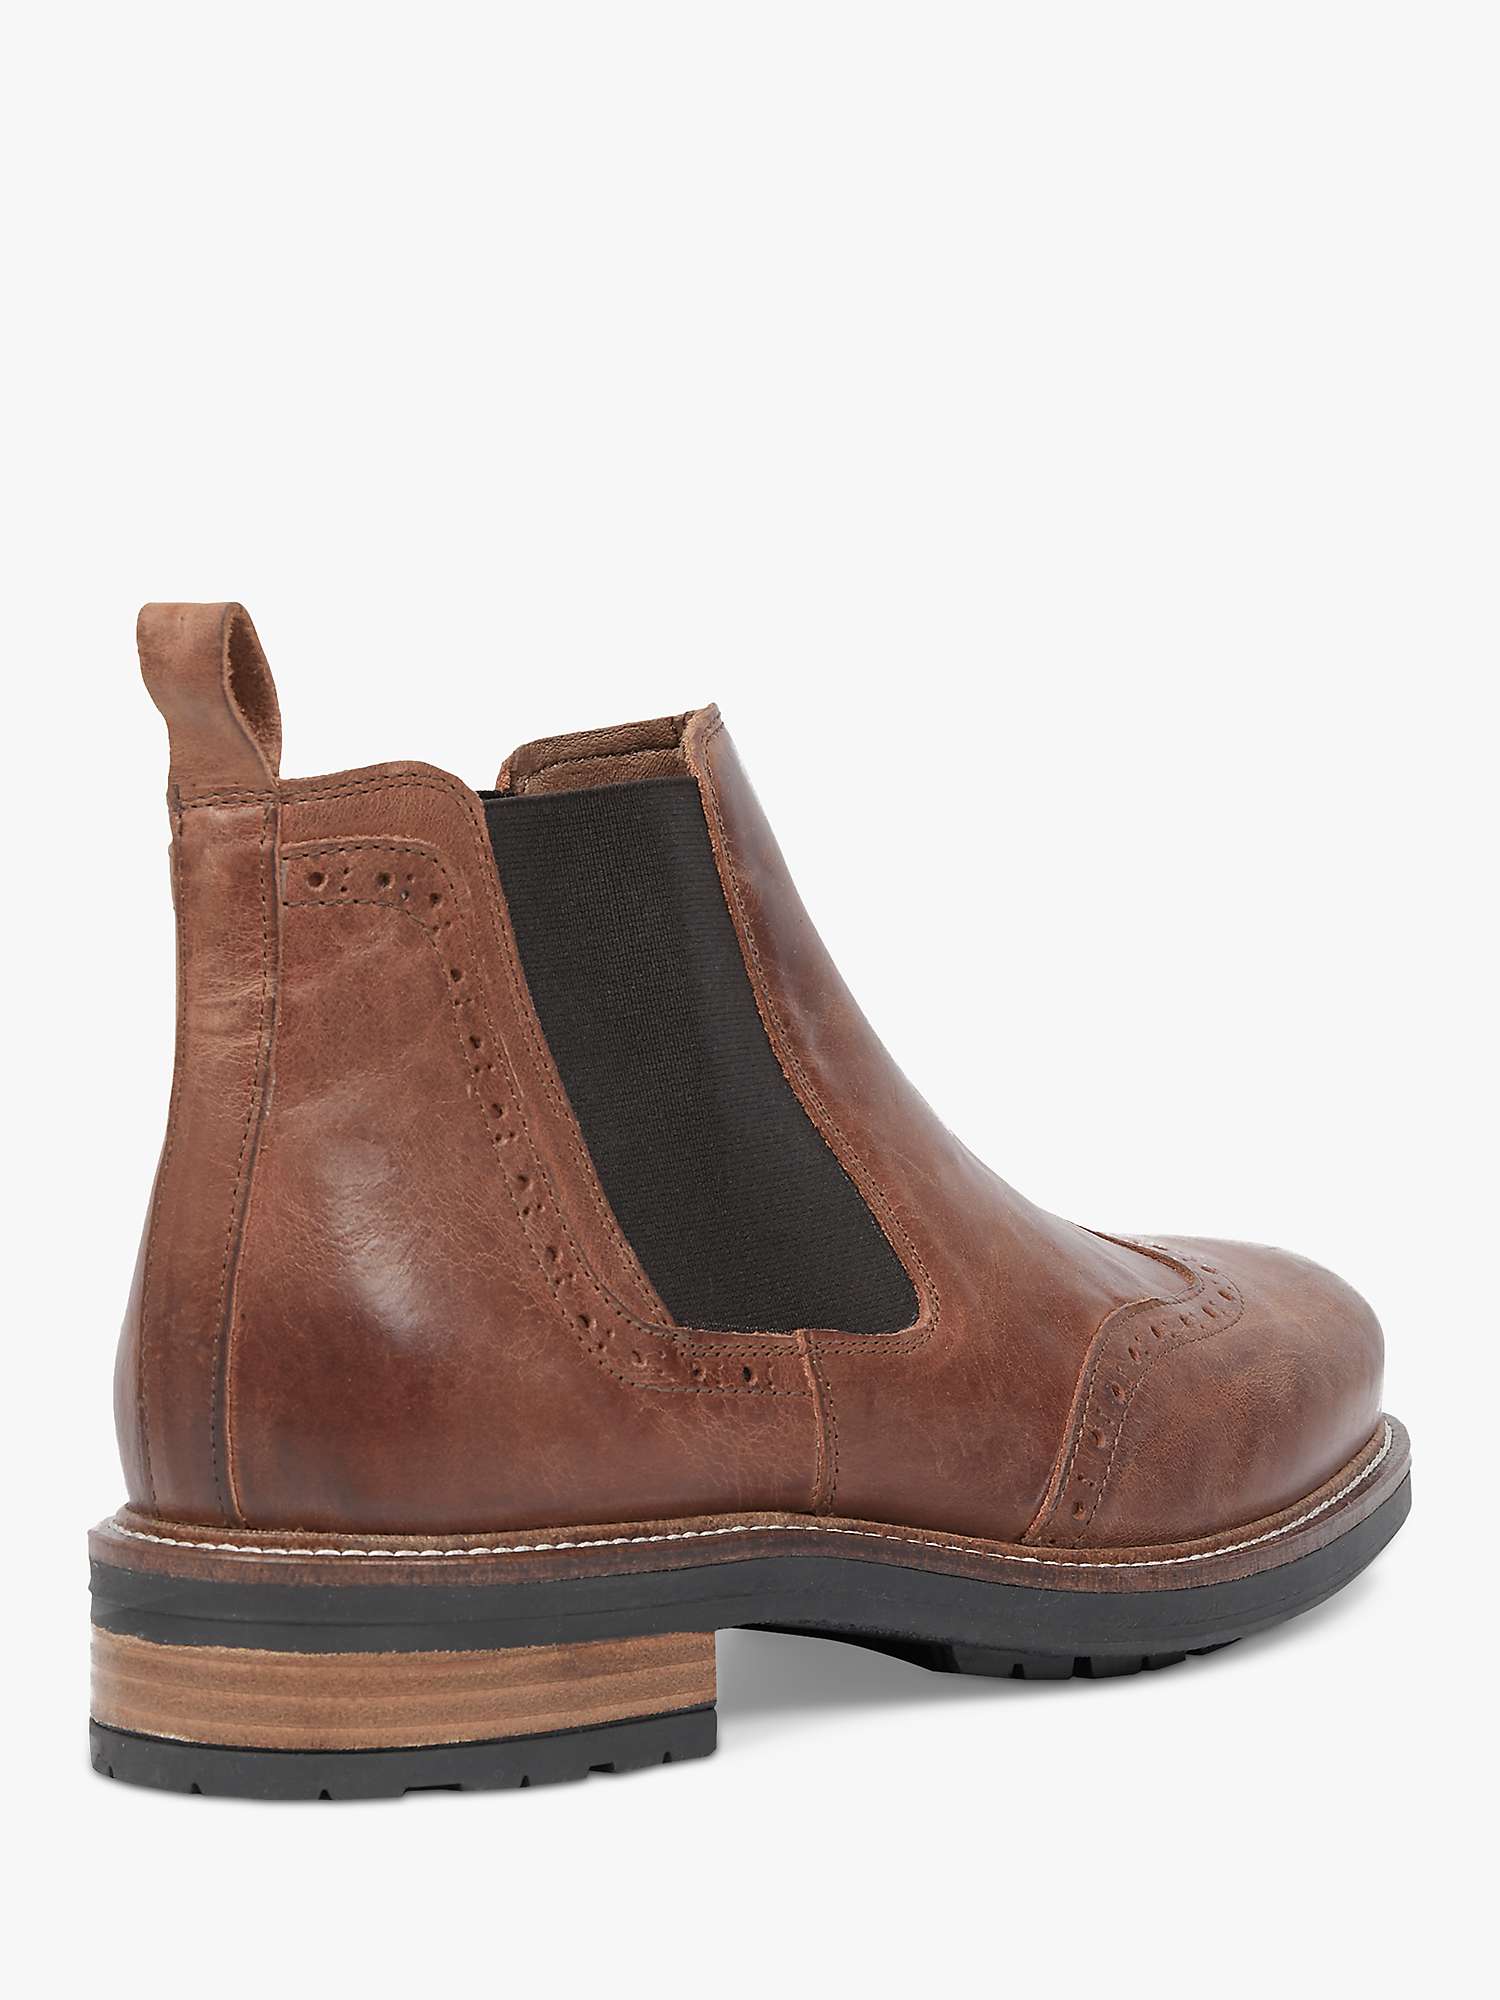 Celtic & Co. Leather Chelsea Brogue Boots, Antique Brown at John Lewis ...